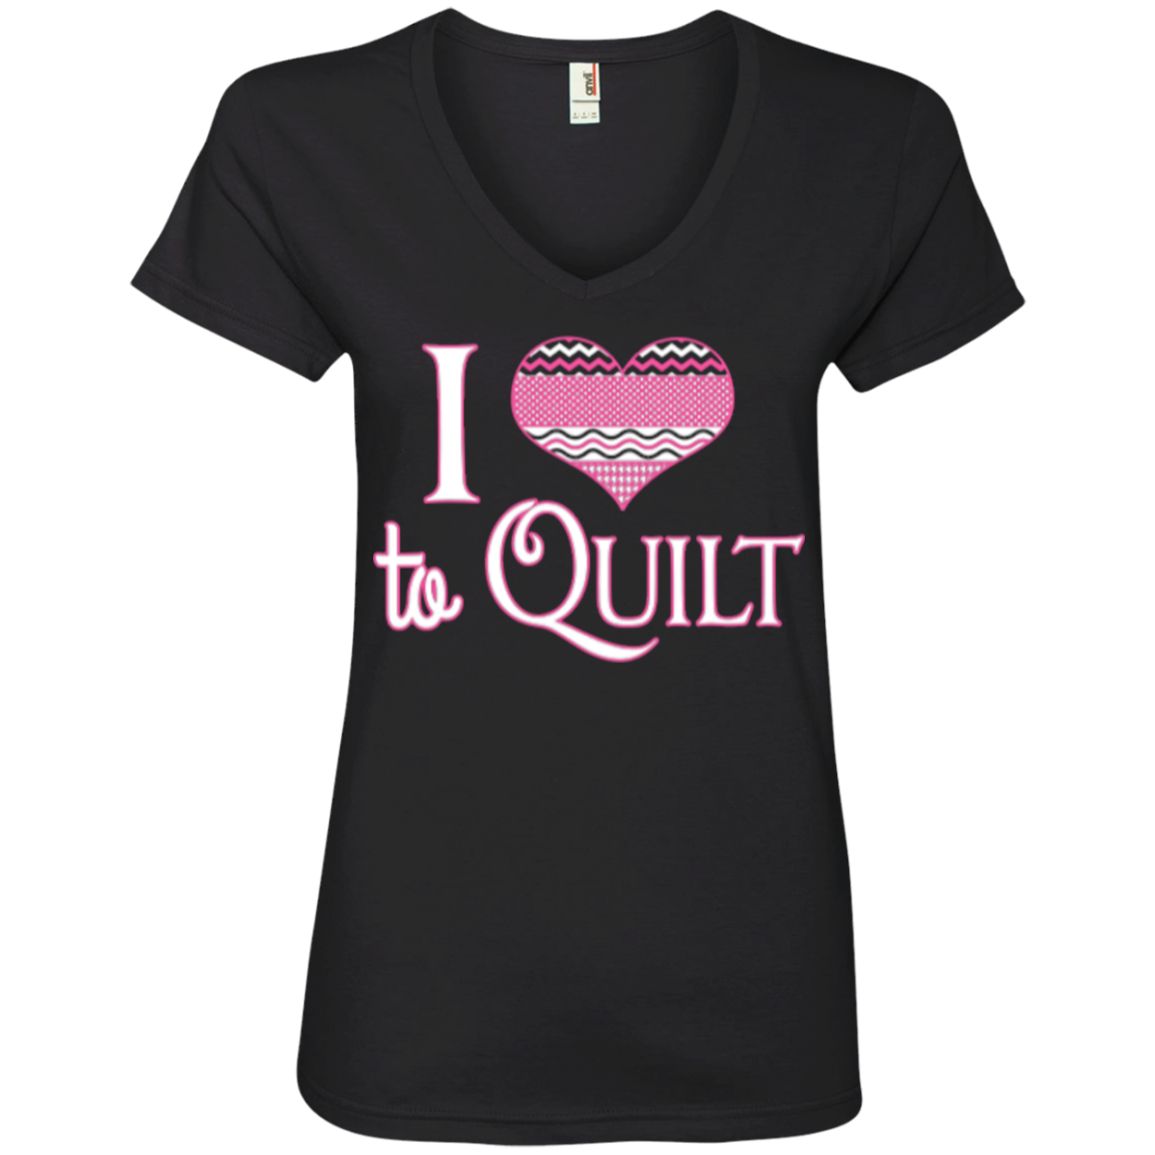 I Heart to Quilt Ladies V-neck Tee - Crafter4Life - 4